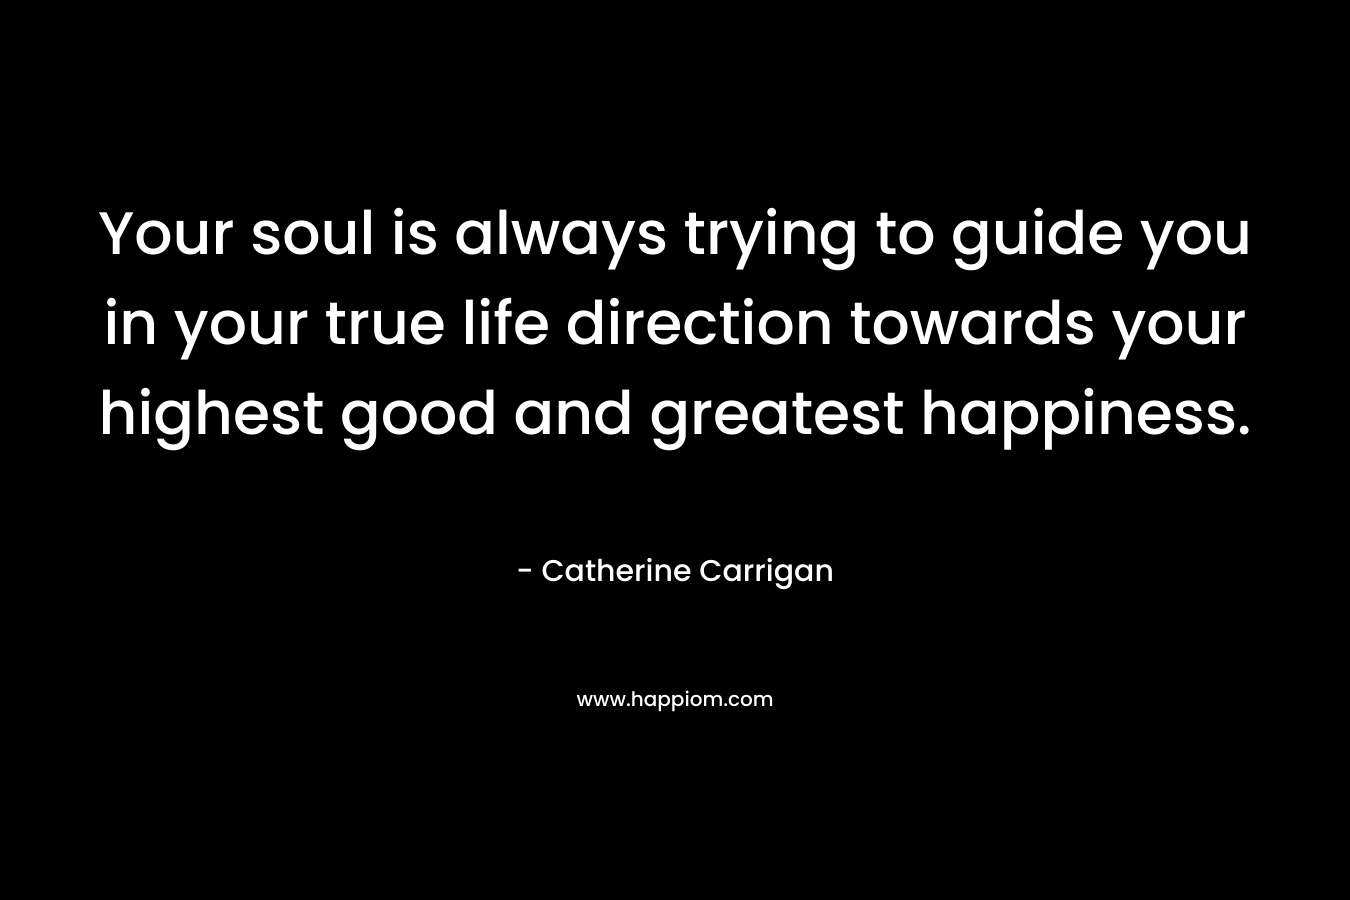 Your soul is always trying to guide you in your true life direction towards your highest good and greatest happiness.